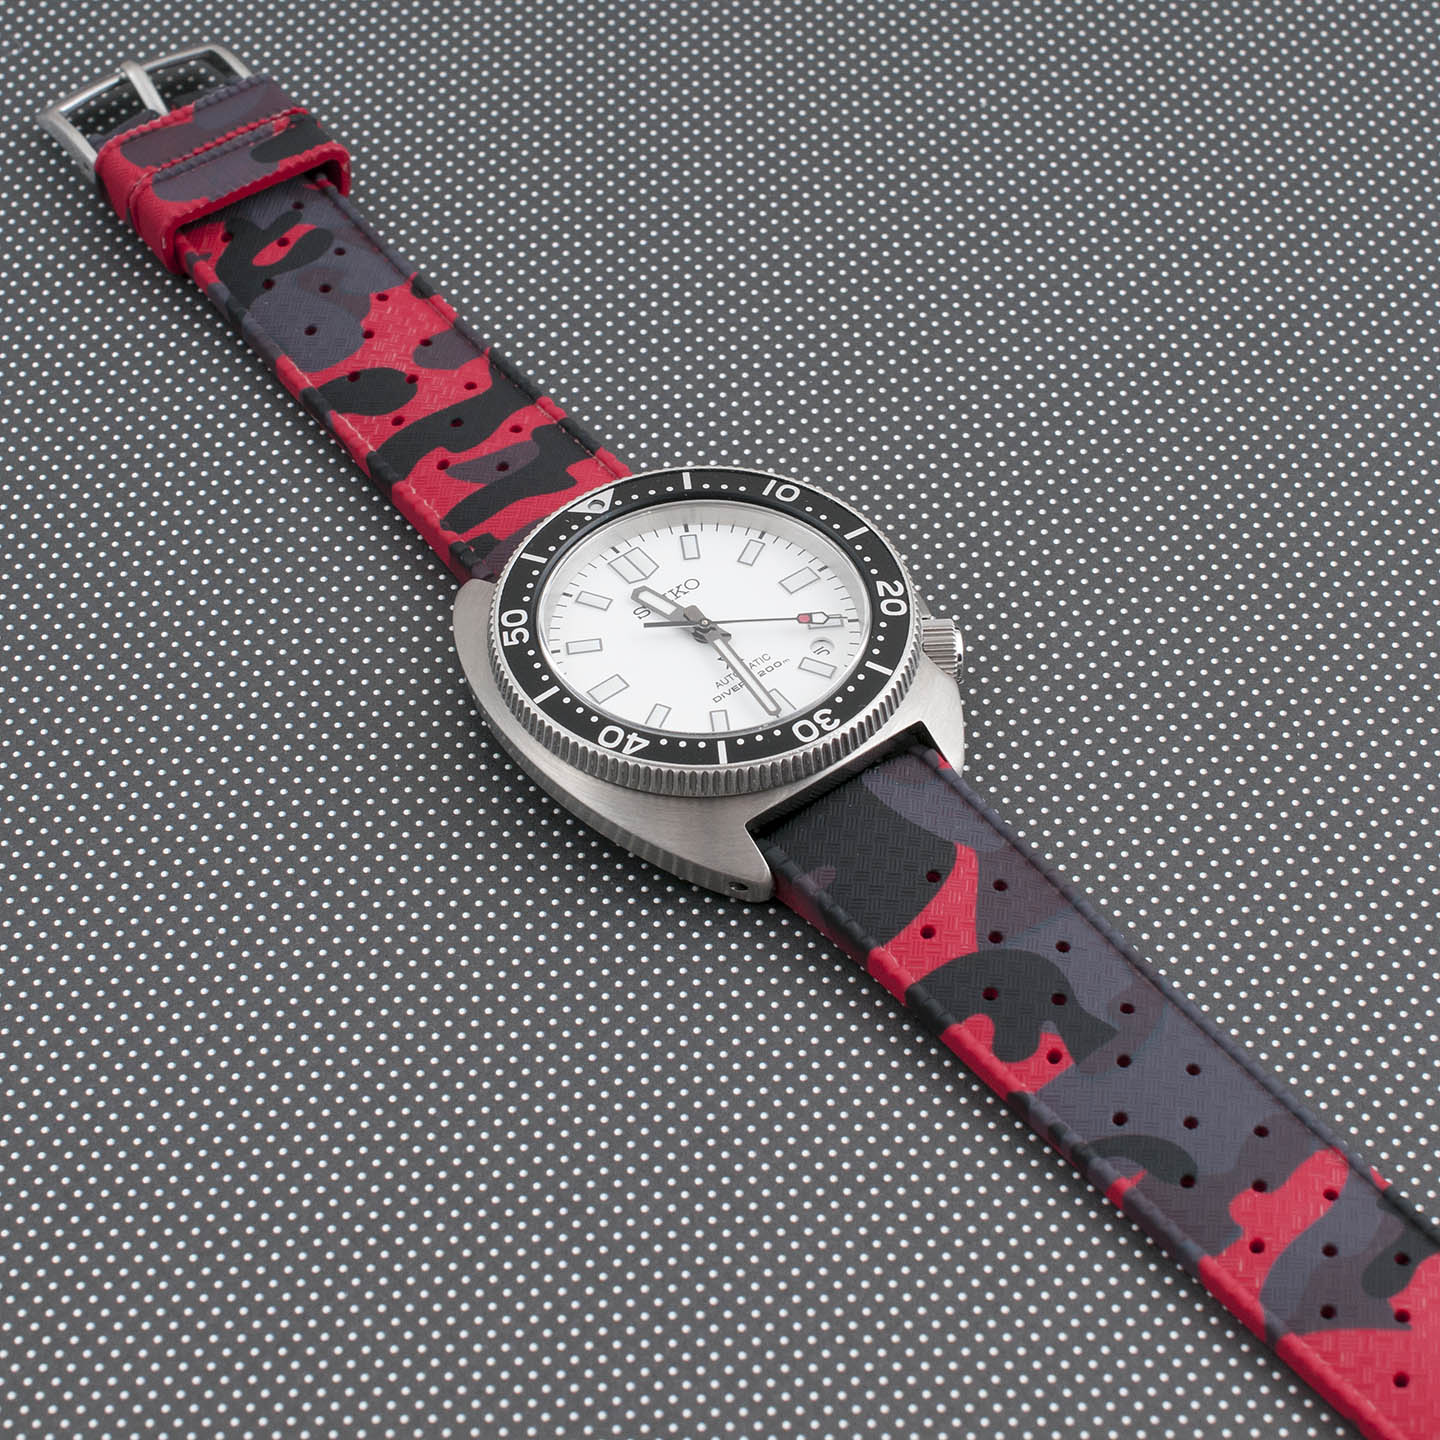 Tropical retro vintage replacement watch strap band FKM rubber tropic 19mm 20mm 21mm 22mm red camo camouflage seiko spb313 slim turtle